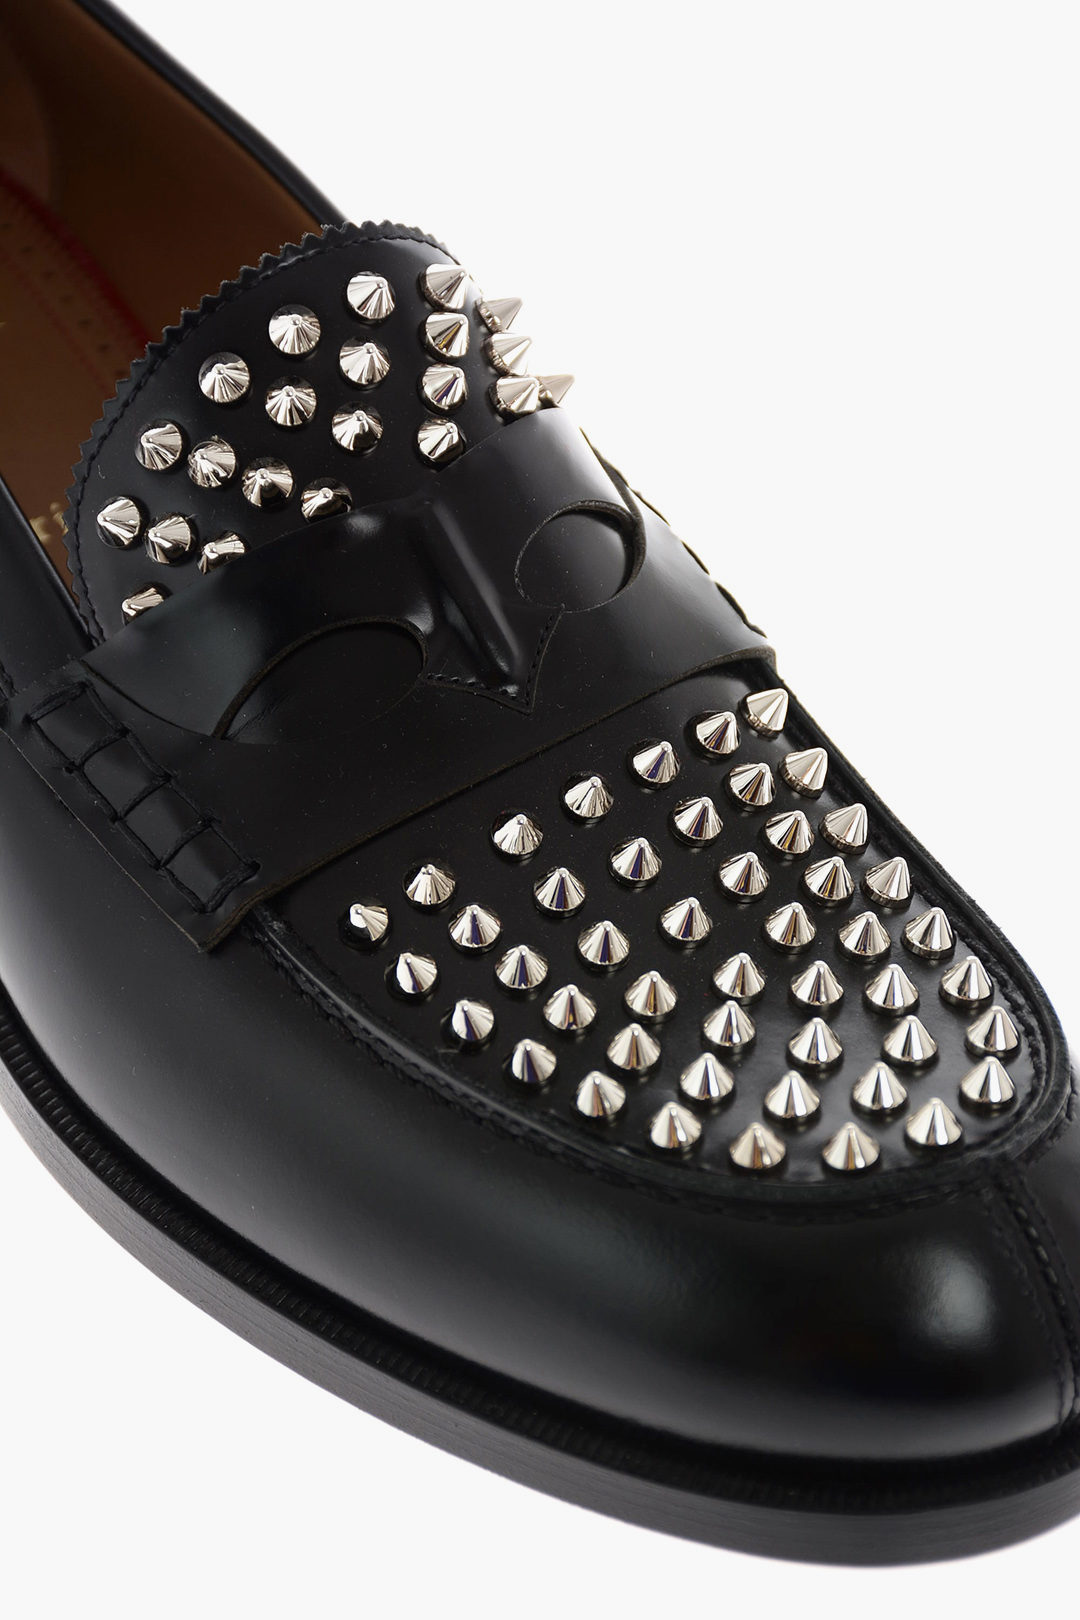 Christian Louboutin leather MONTEZUPIK loafers with studs men 